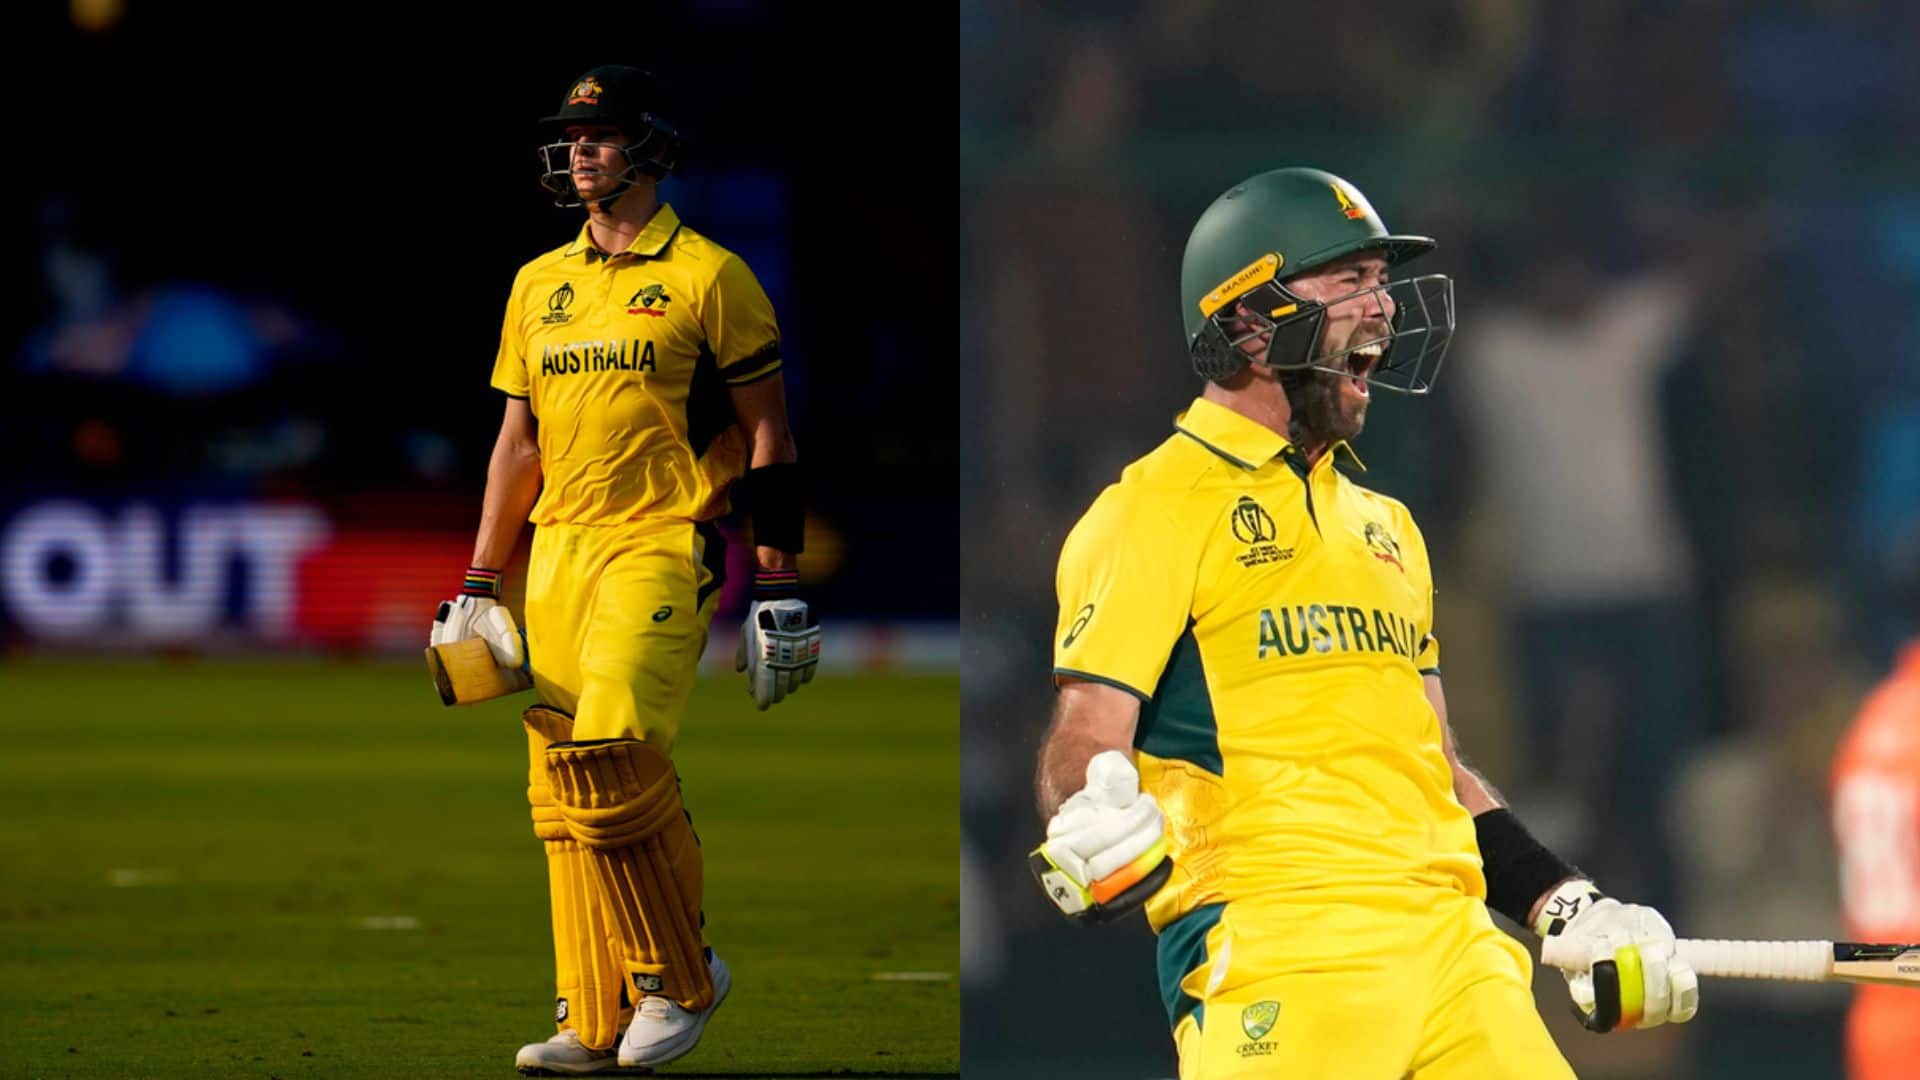 Steve Smith Ruled Out, Maxwell & Marsh In? Here's Australia's Playing XI Vs Afghanistan